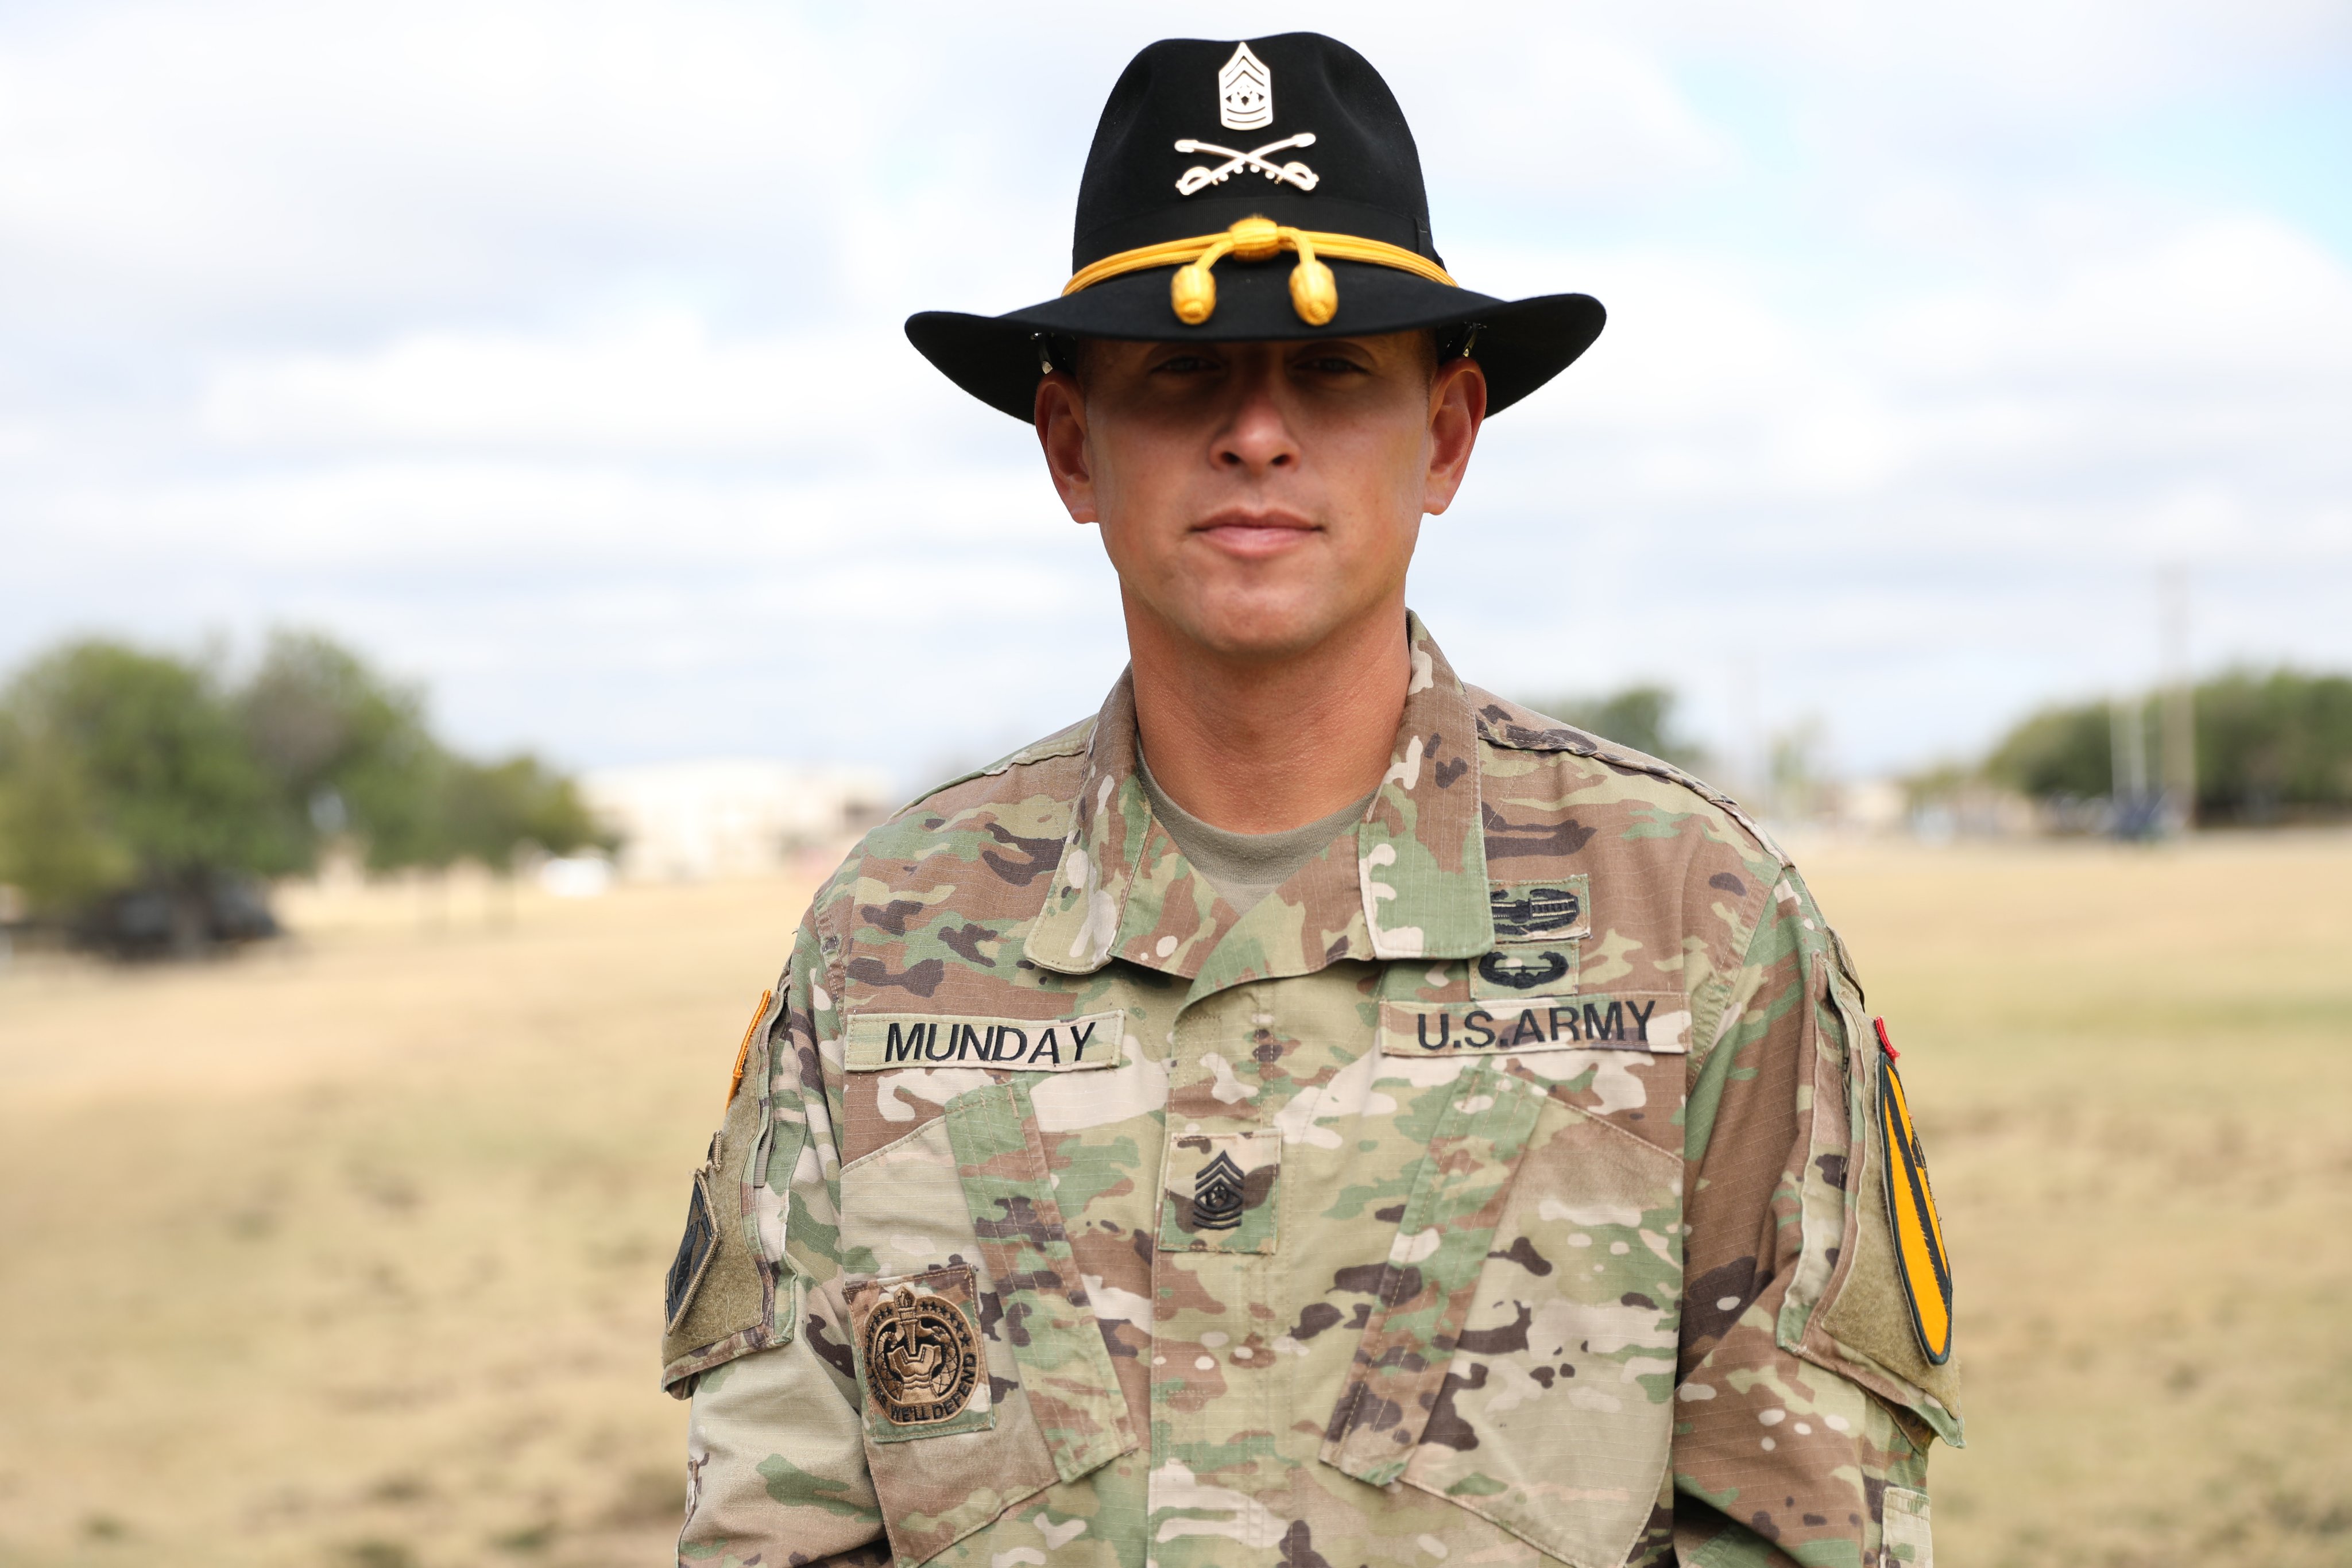 1st Cav Farewells Senior Leadership, Welcomes First Female Deputy CG  Article The United States Army